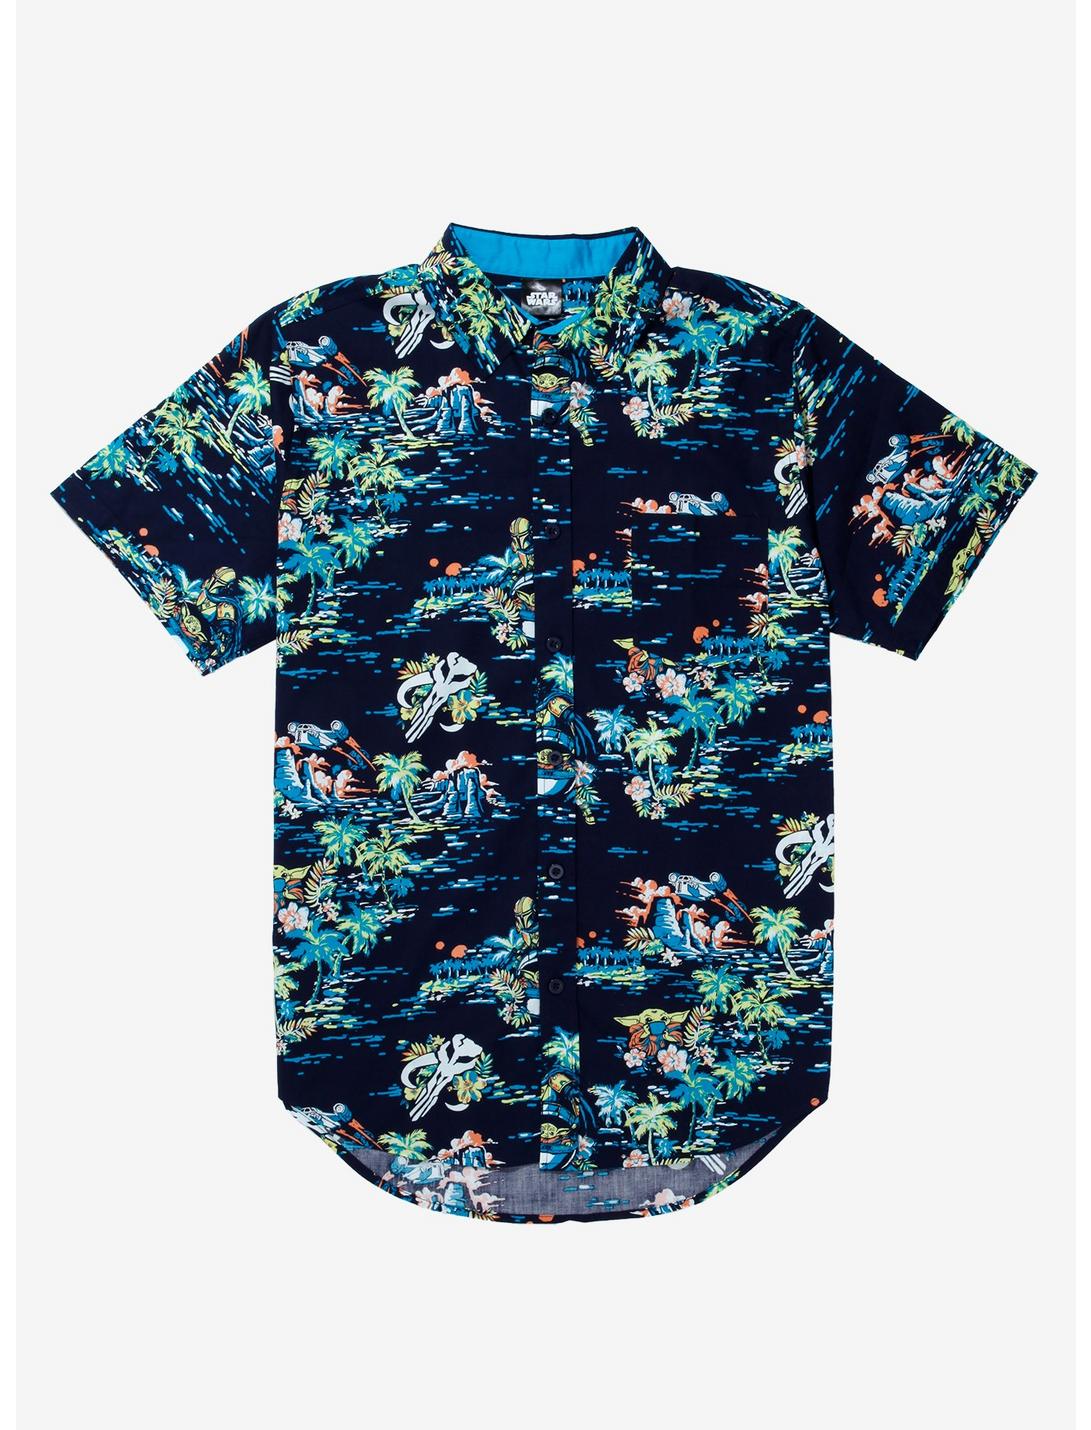 Star Wars The Mandalorian The Child Island Woven Button-Up - BoxLunch Exclusive, NAVY, hi-res